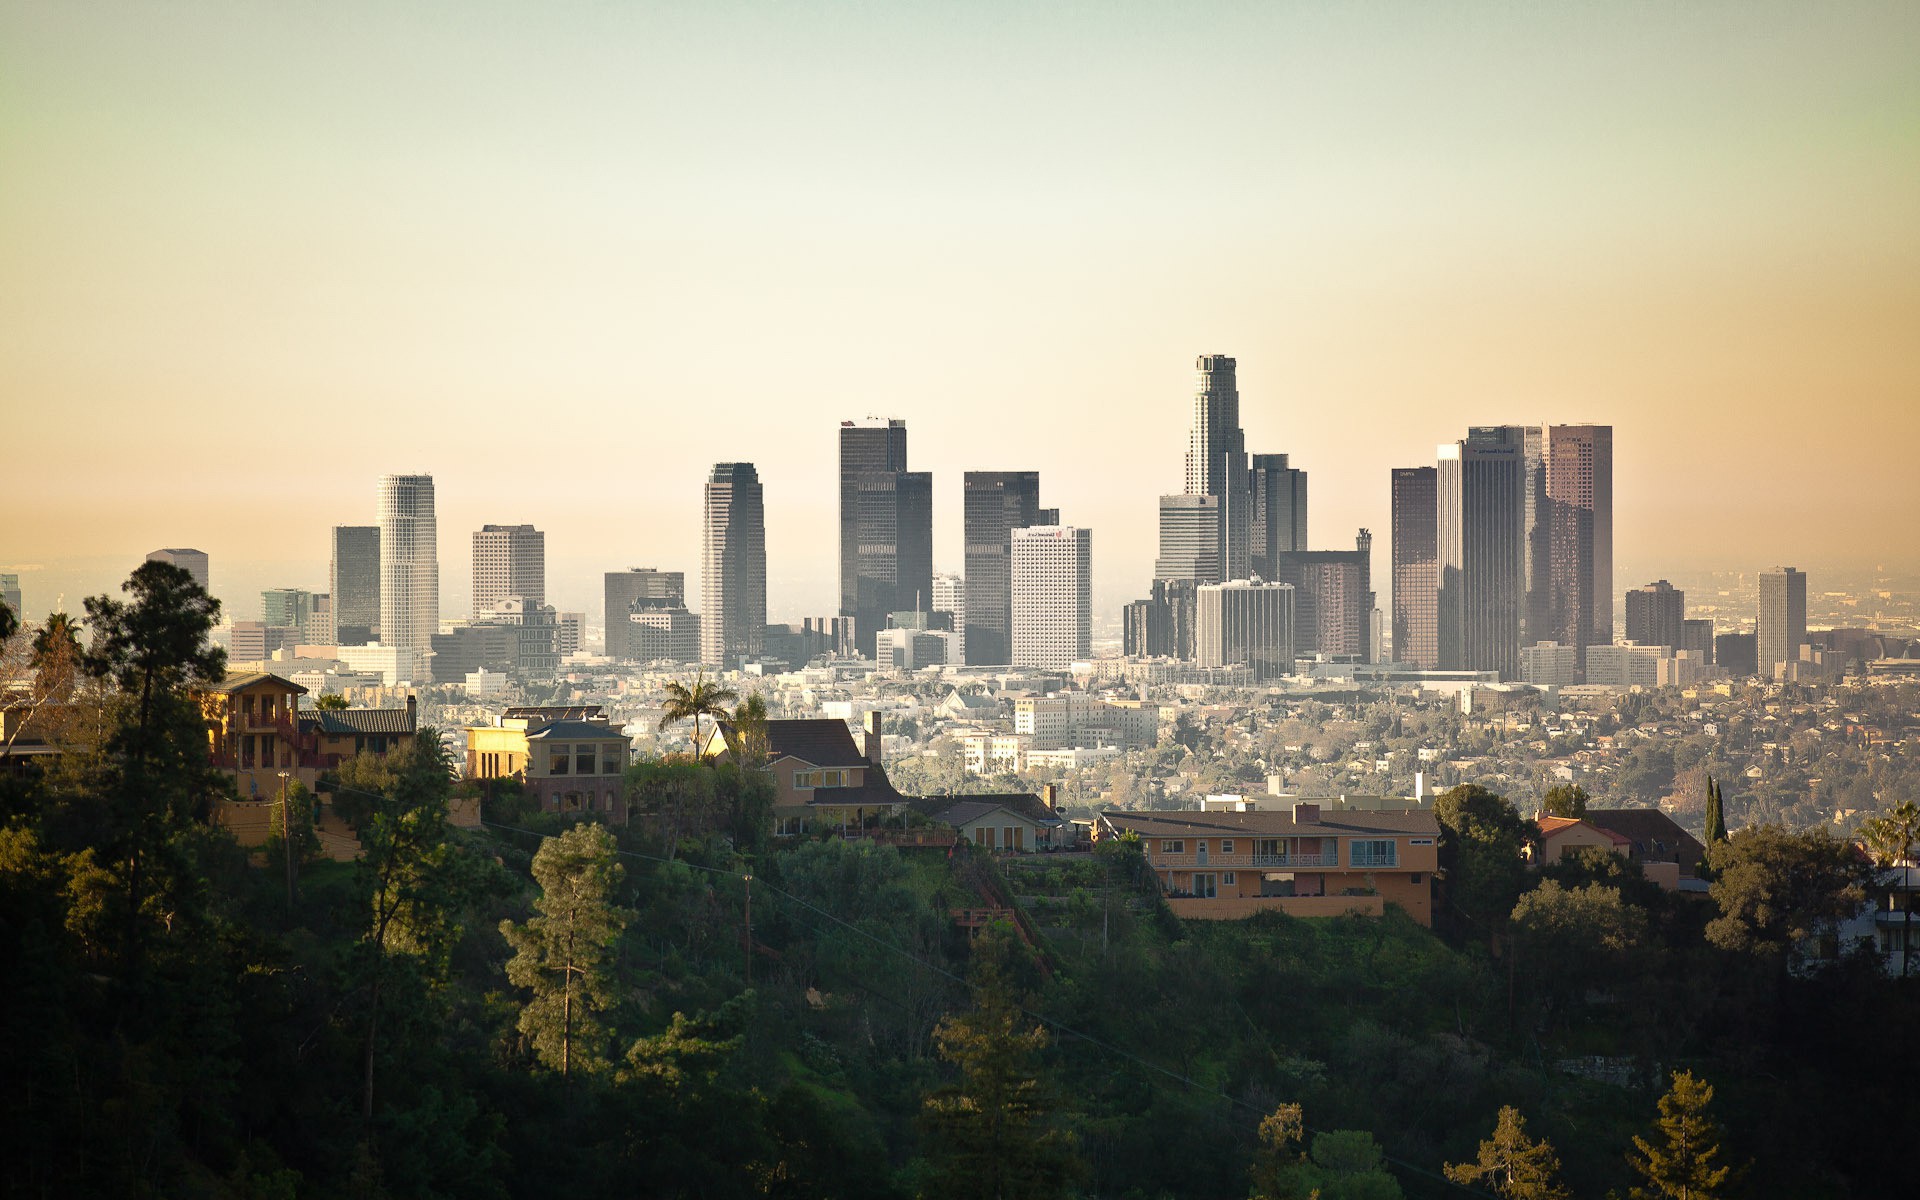 Los Angeles Image Downtown Skyline HD Wallpaper And